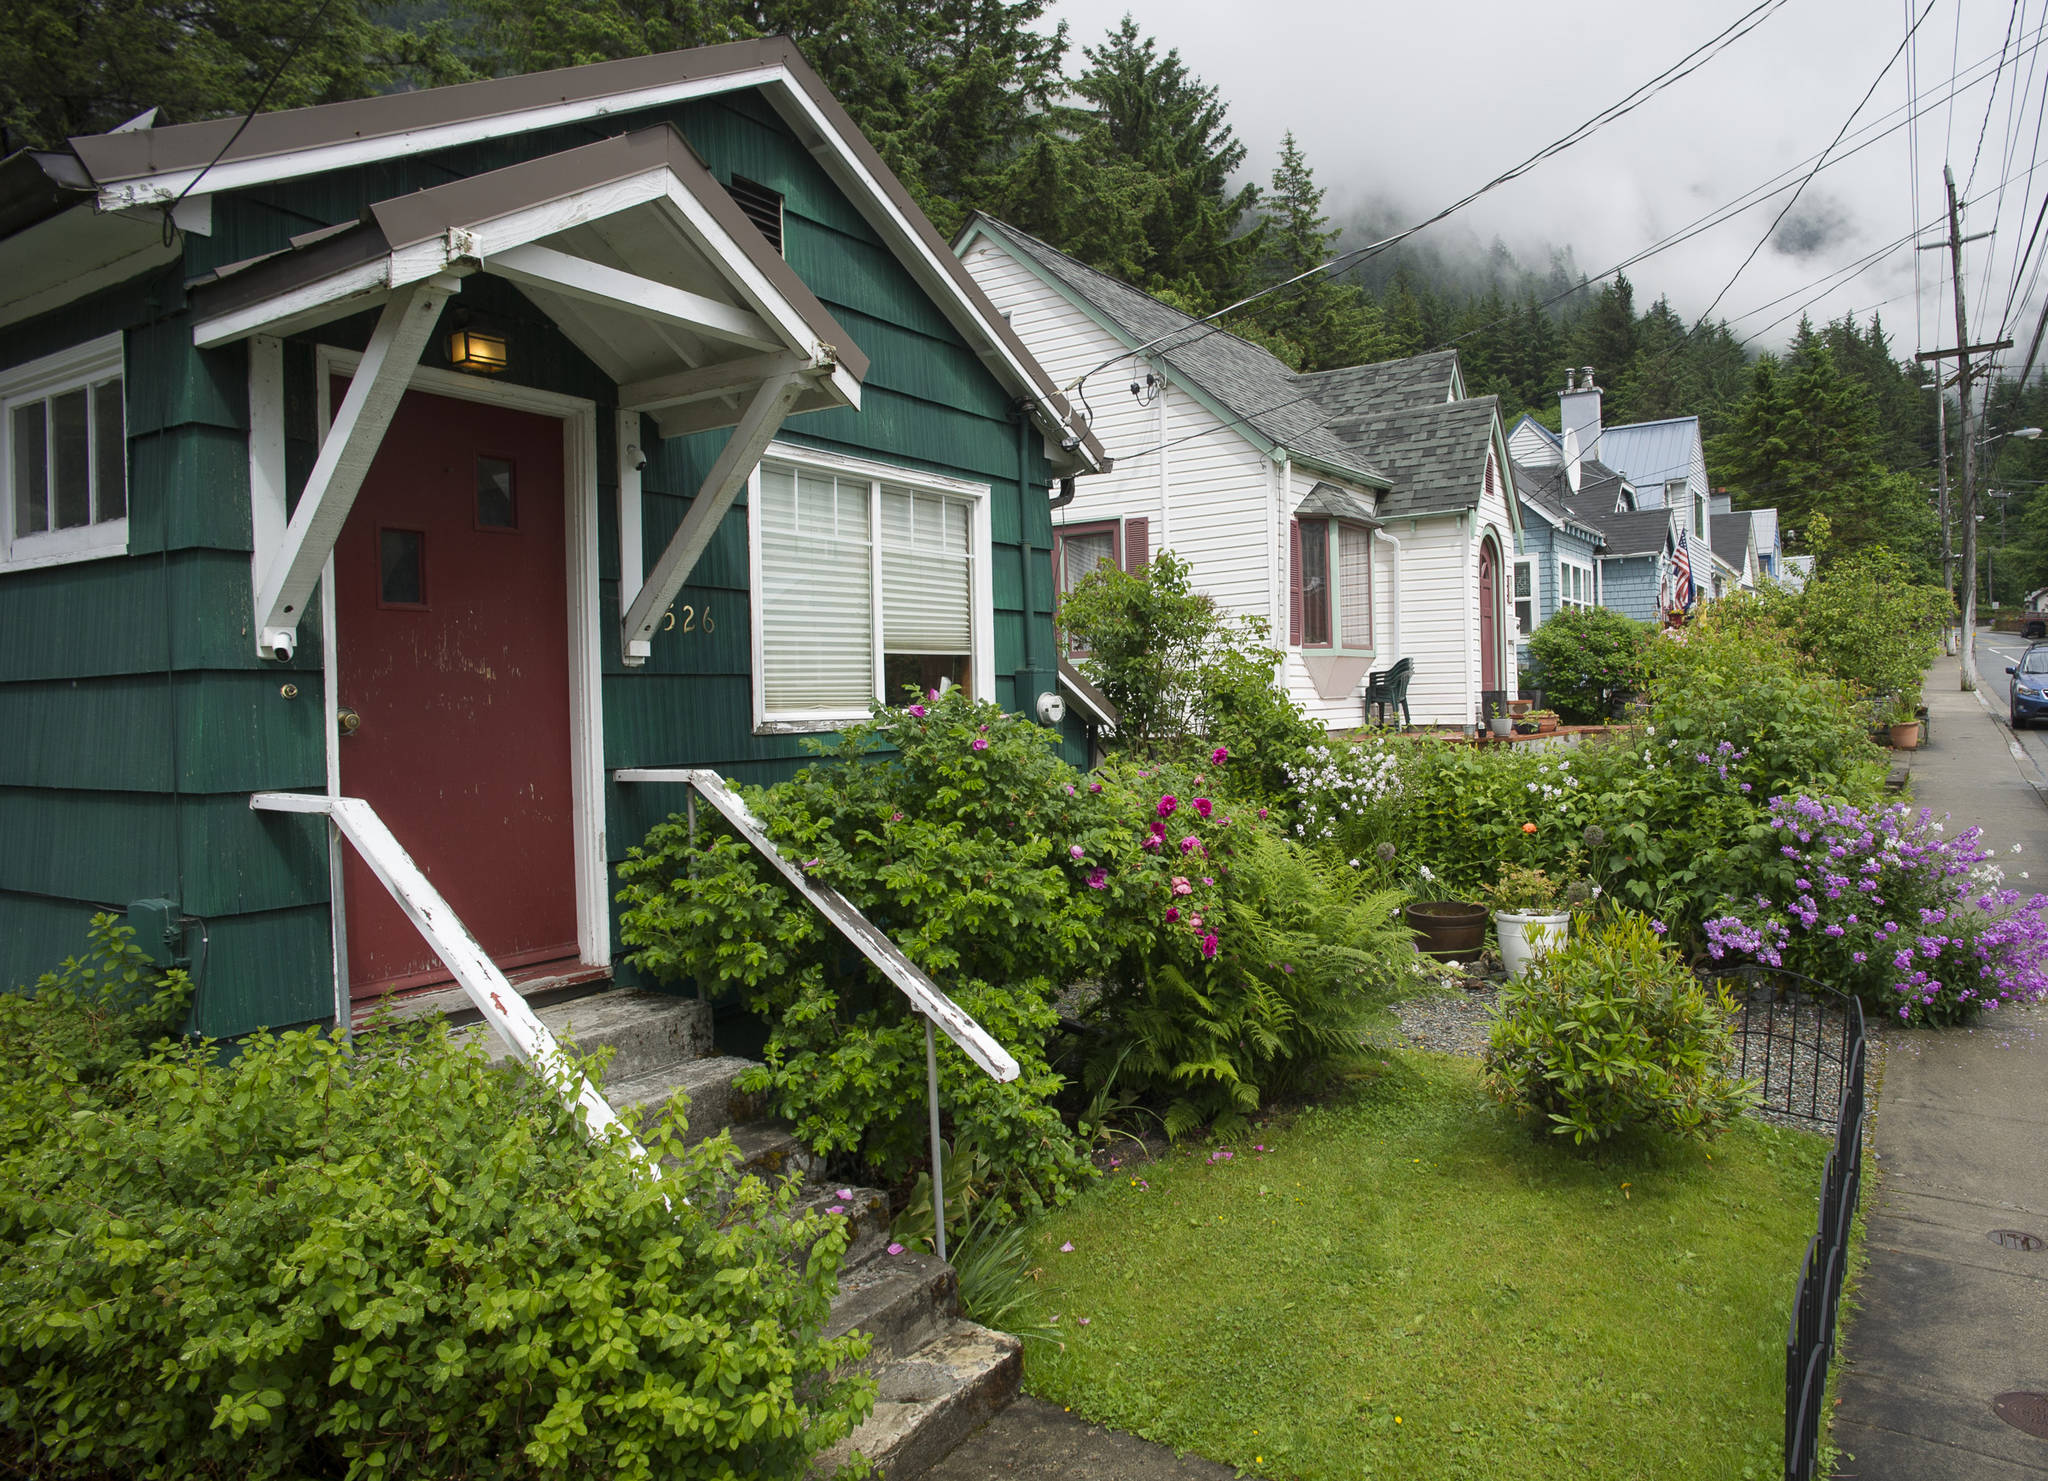 Twelfth Street on Tuesday, June 27, 2017. The city is considering a zoning ordinance to preserve the historic feel of Juneau neighborhoods. (Michael Penn | Juneau Empire)